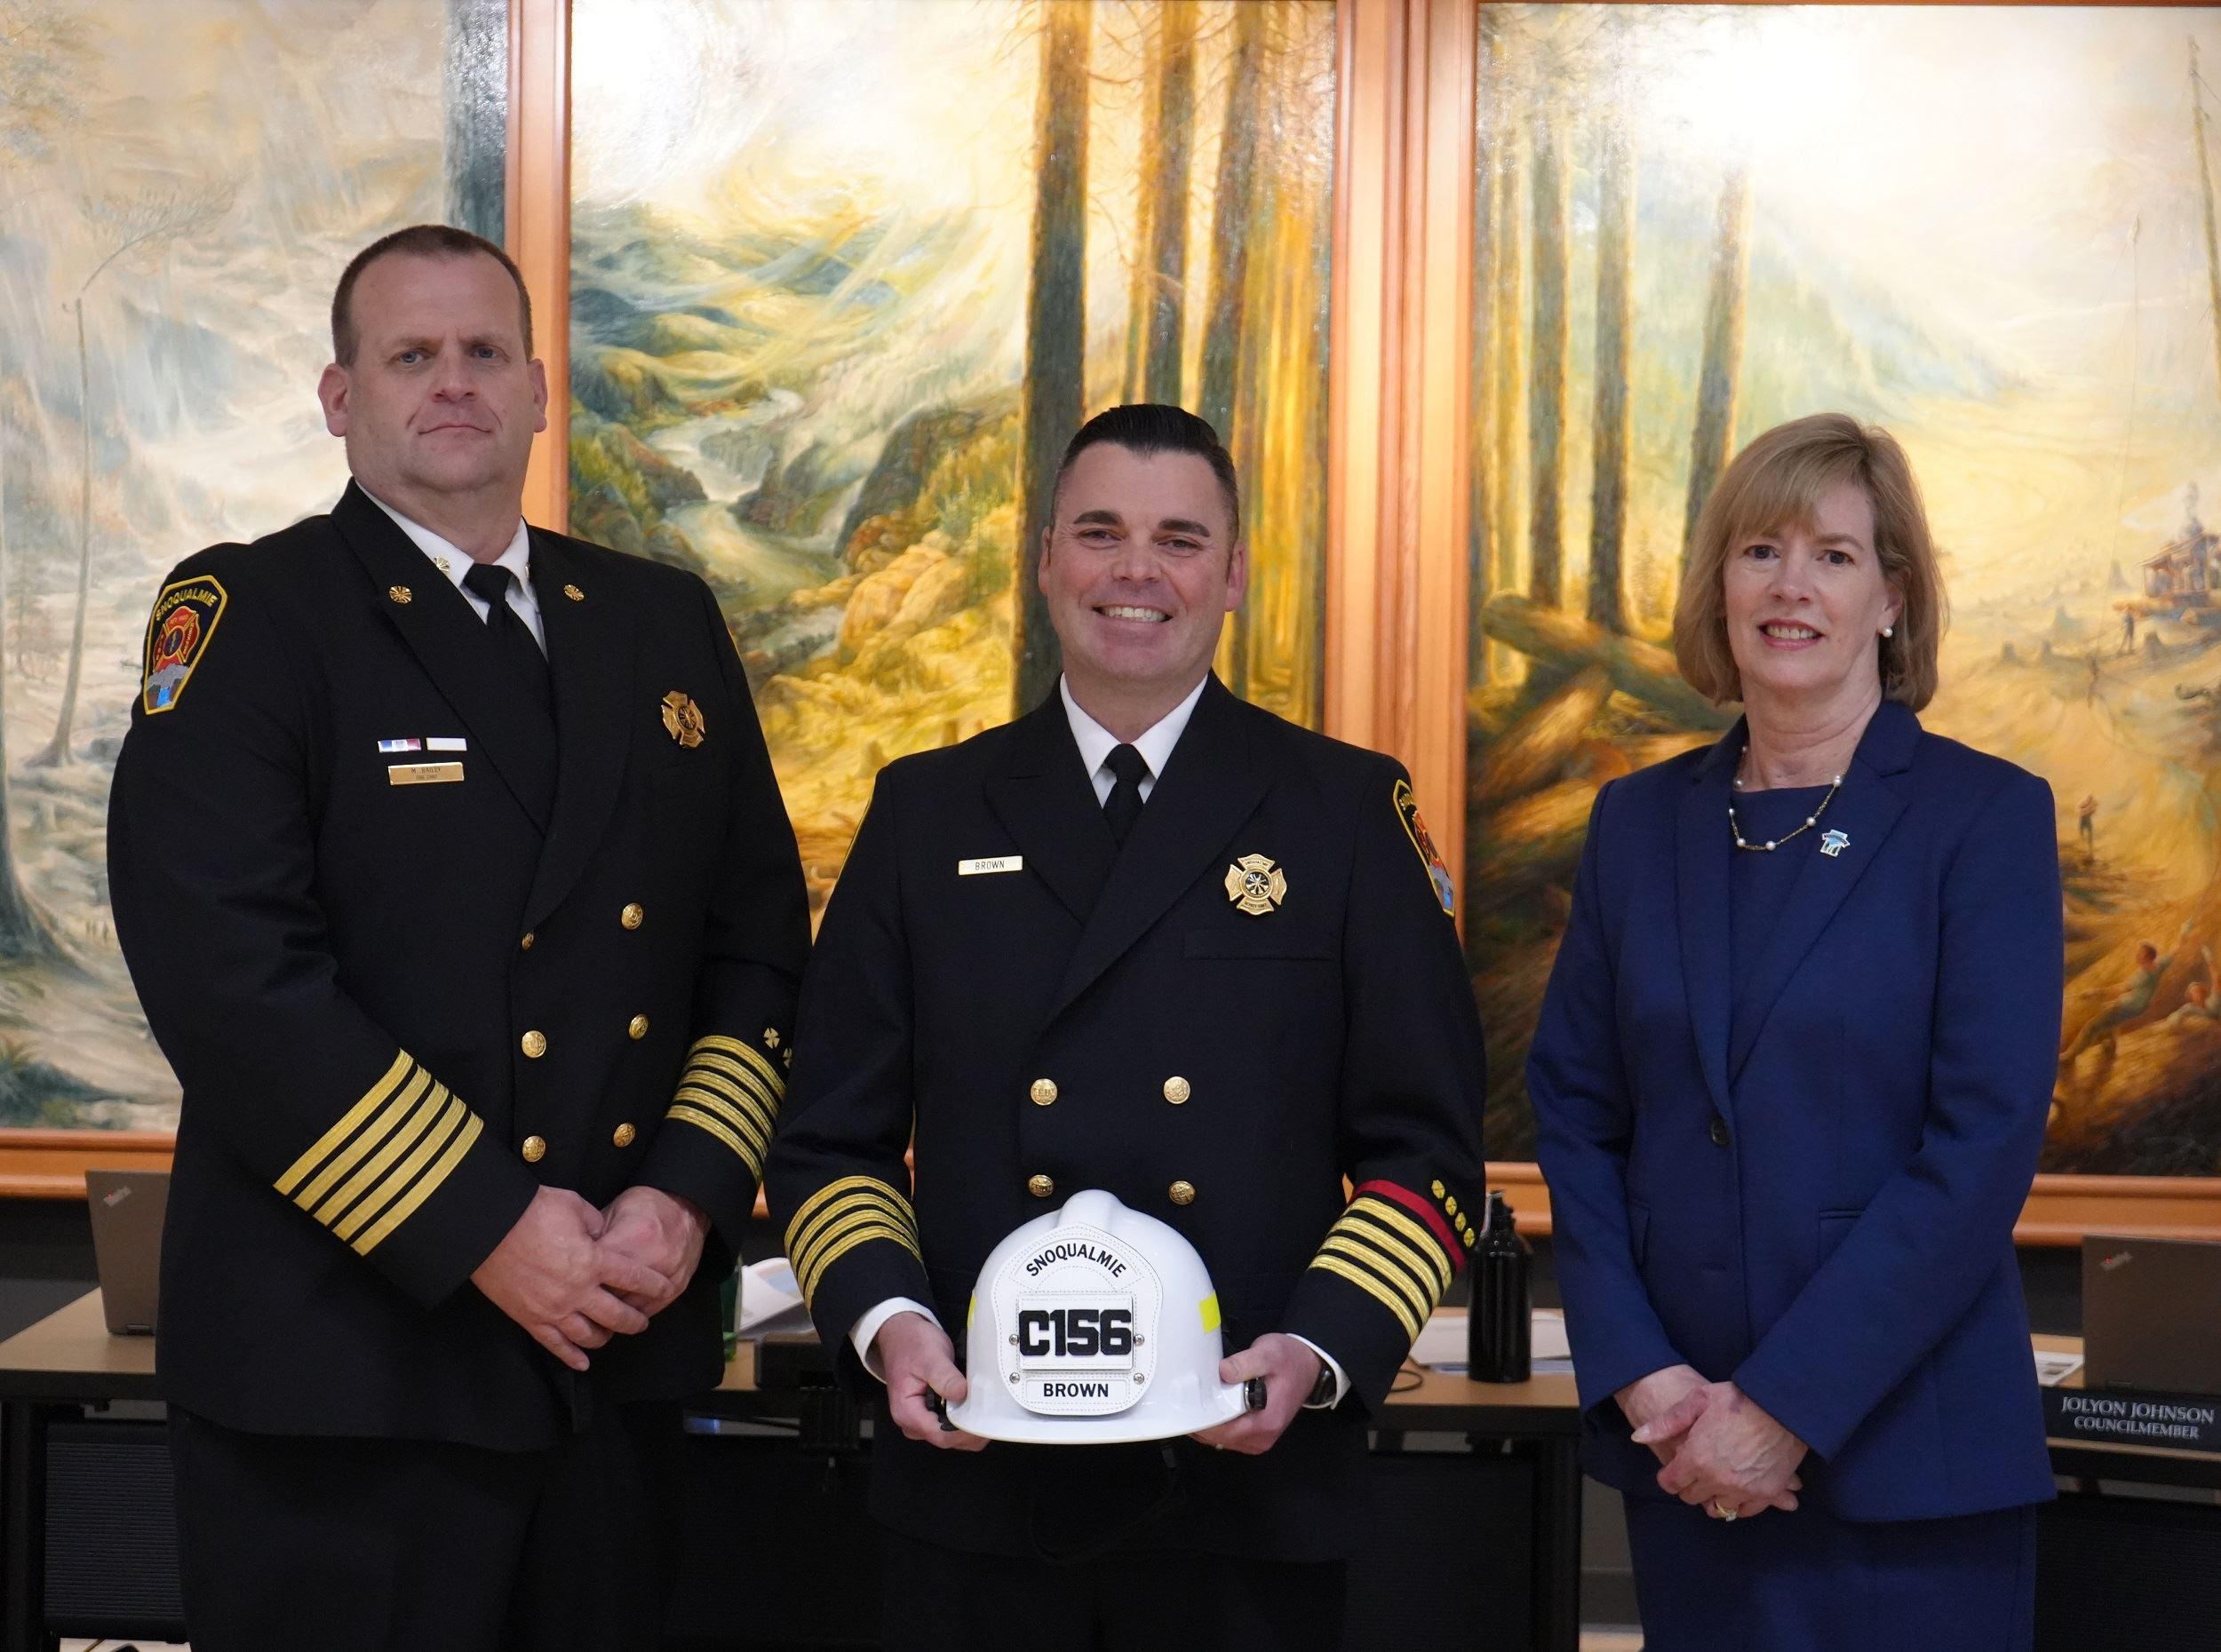  Welcoming Chris Brown: Snoqualmie's New Deputy Fire Chief - Living Snoqualmie 